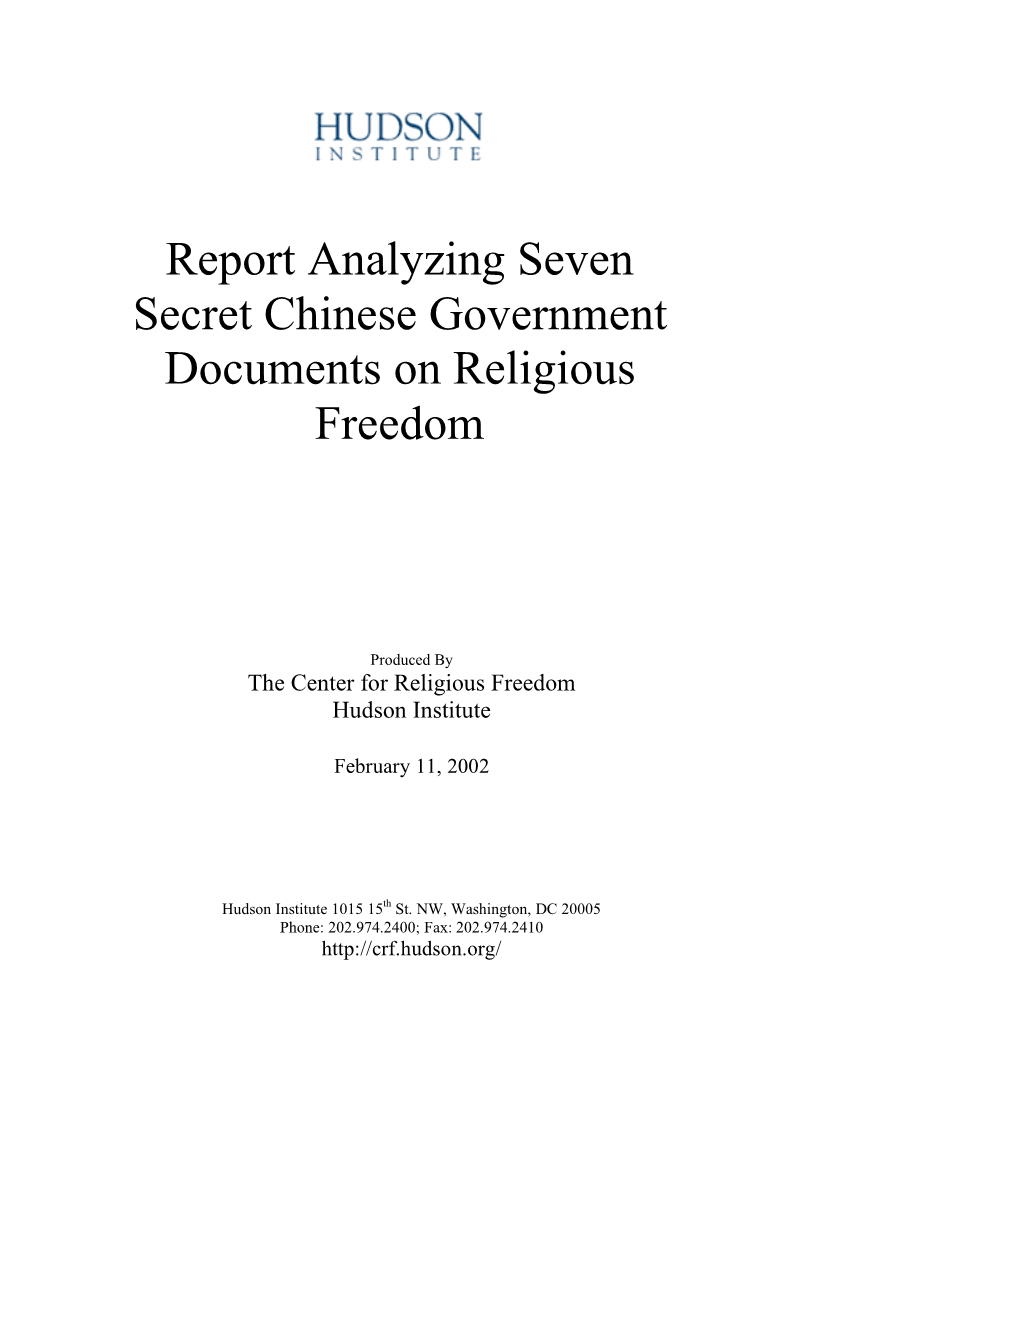 Report Analyzing Seven Secret Chinese Government Documents on Religious Freedom